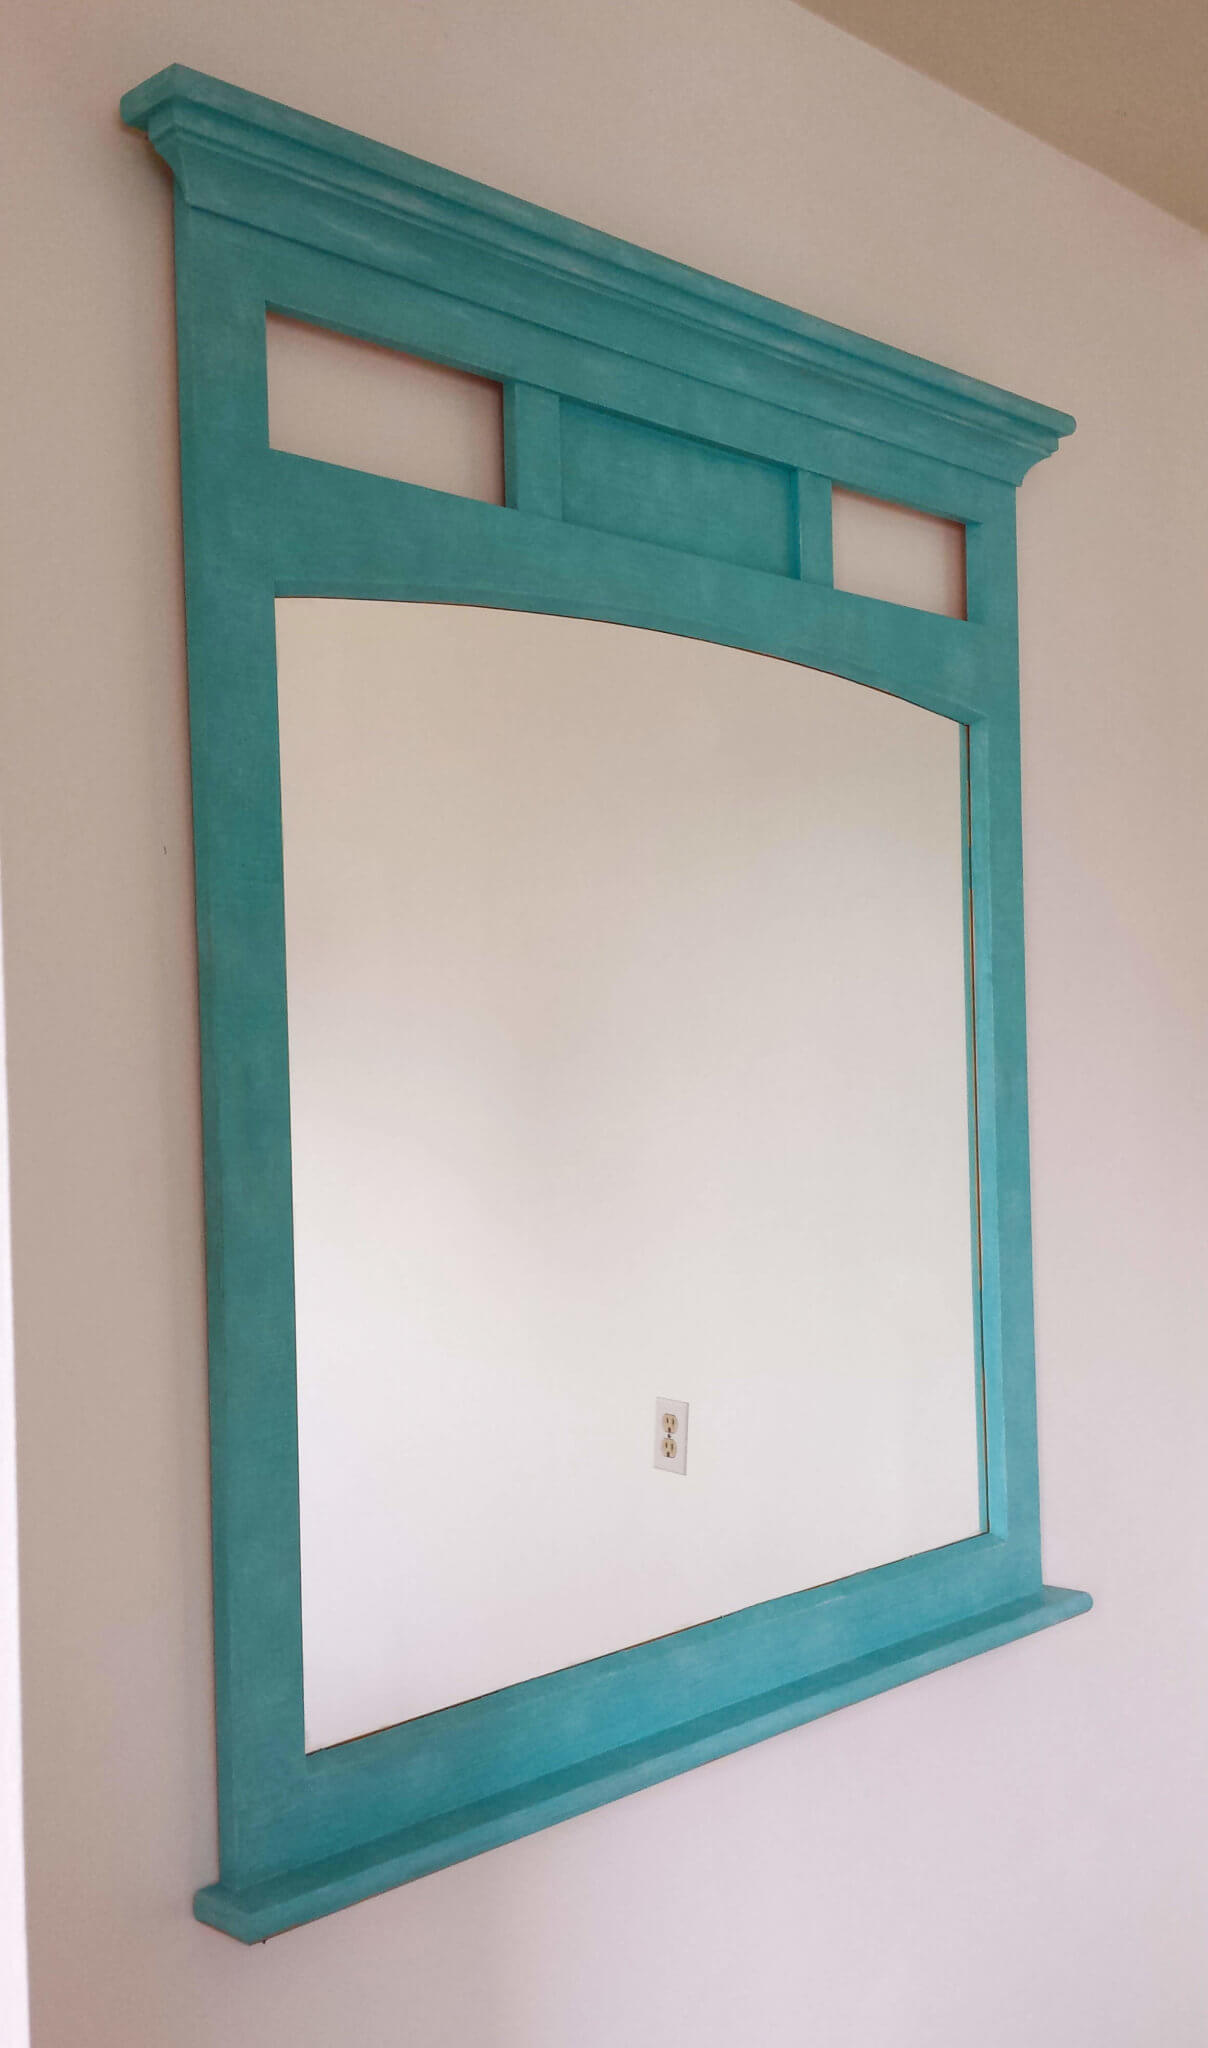 How to Frame a Builder-Grade Mirror - The Turquoise Home